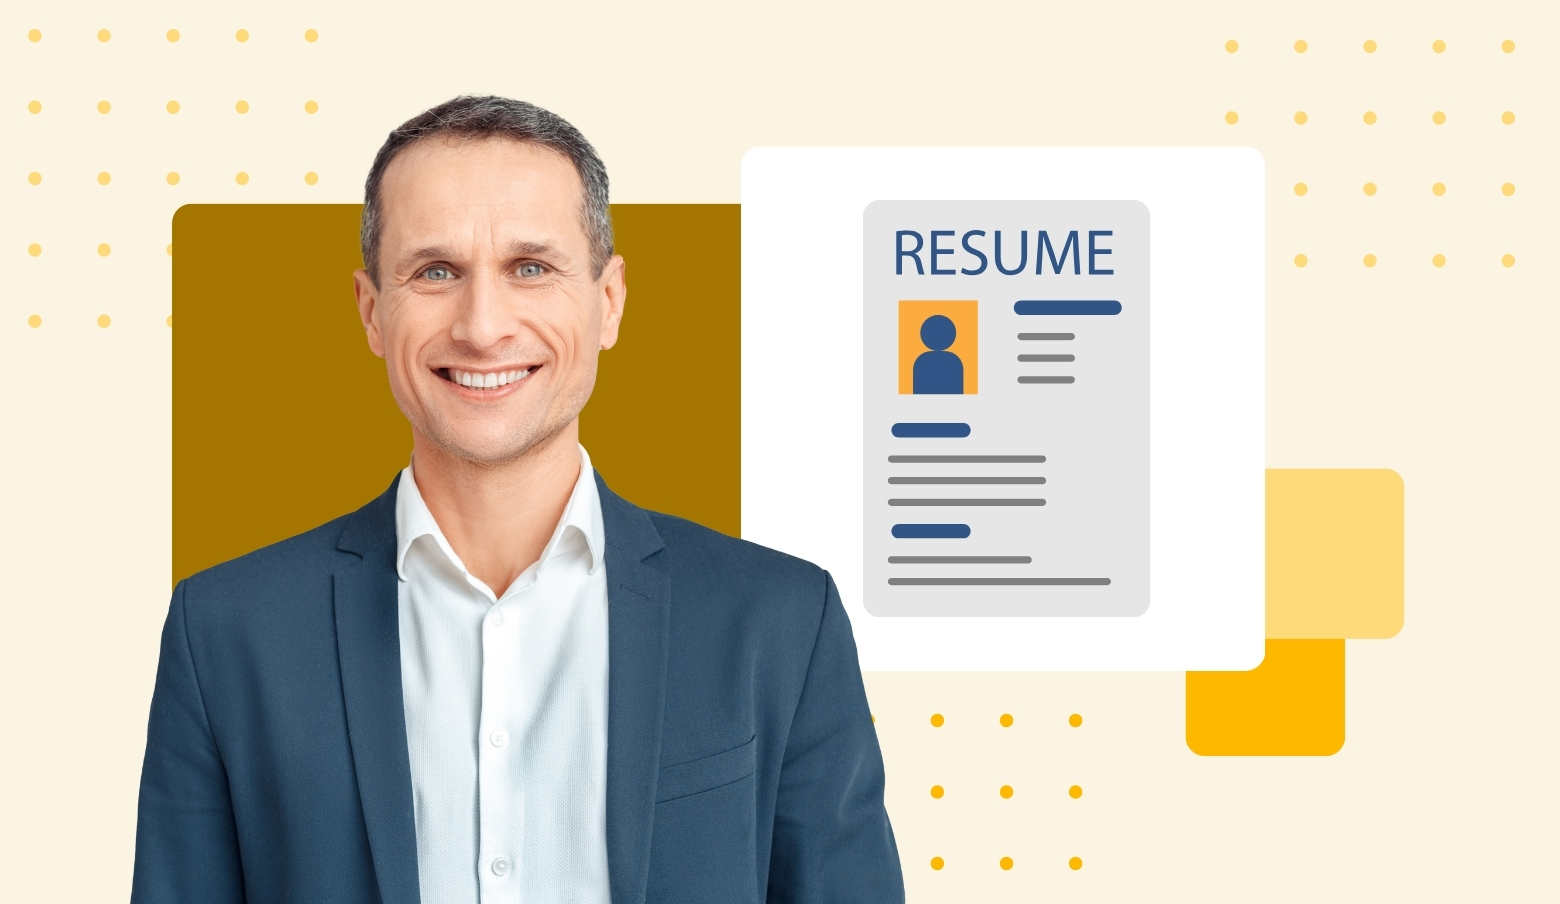 Why do you need to add your certificates to your resume